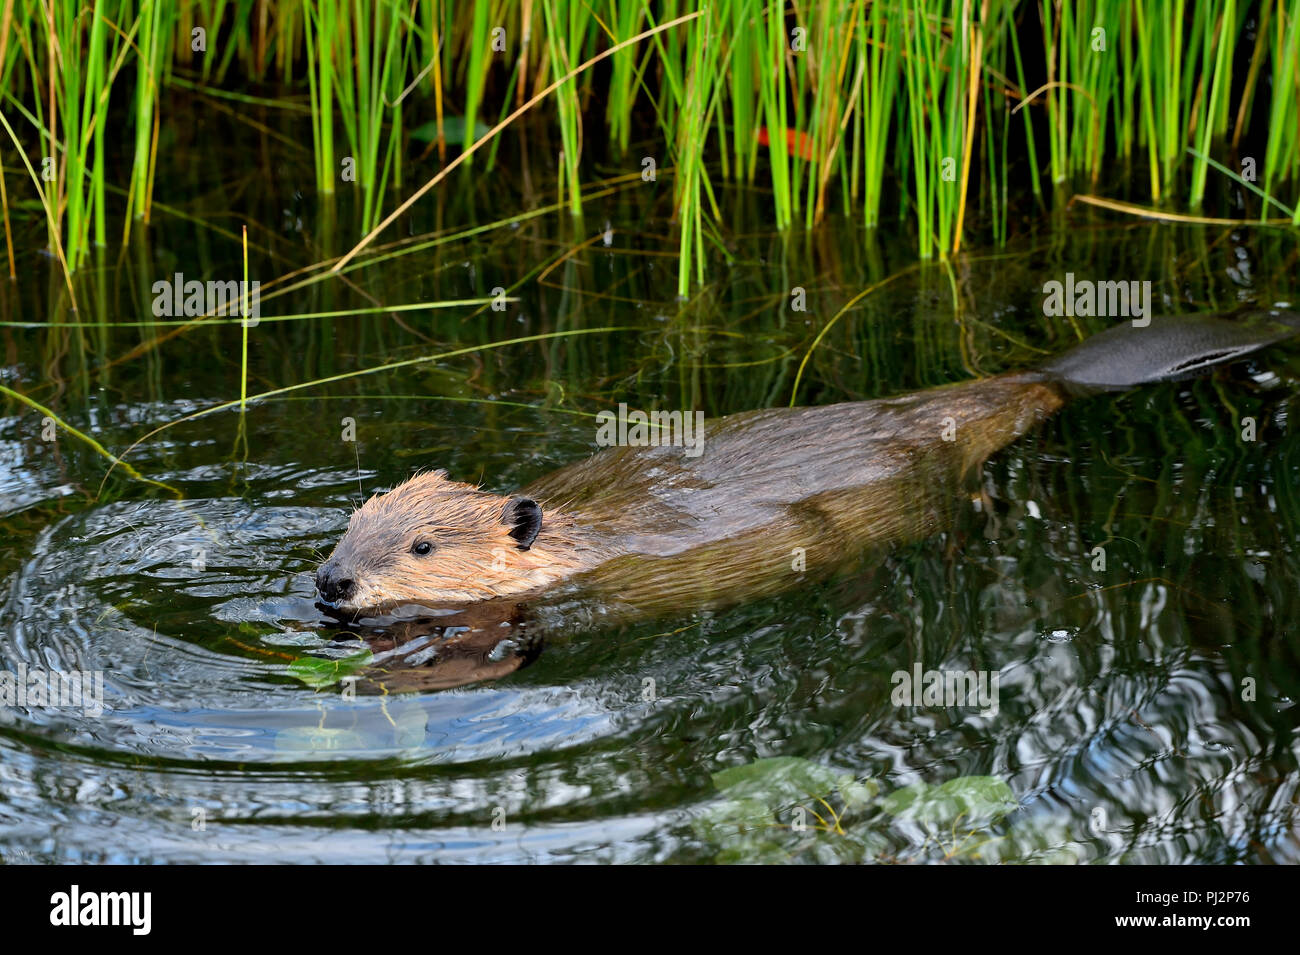 A top view of a wild beaver (Castor canadensis), floating on the water and feeding on some aspen tree leaves Stock Photo